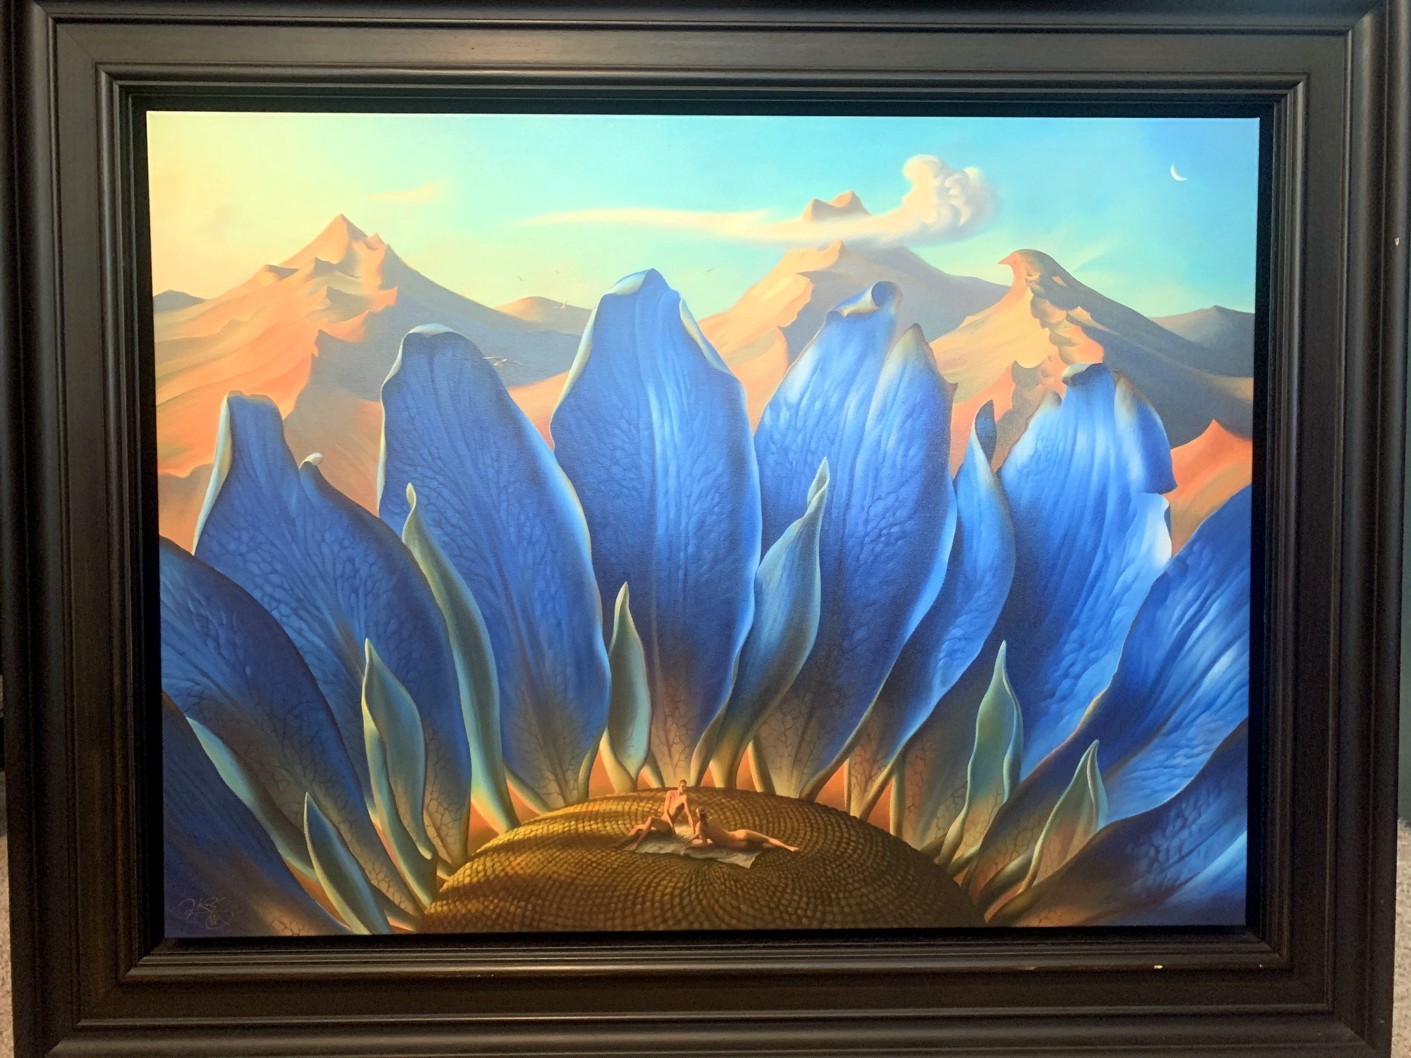 Across_the_mountians-and-into-the trees
Edition: 50 by Vladimir Kush